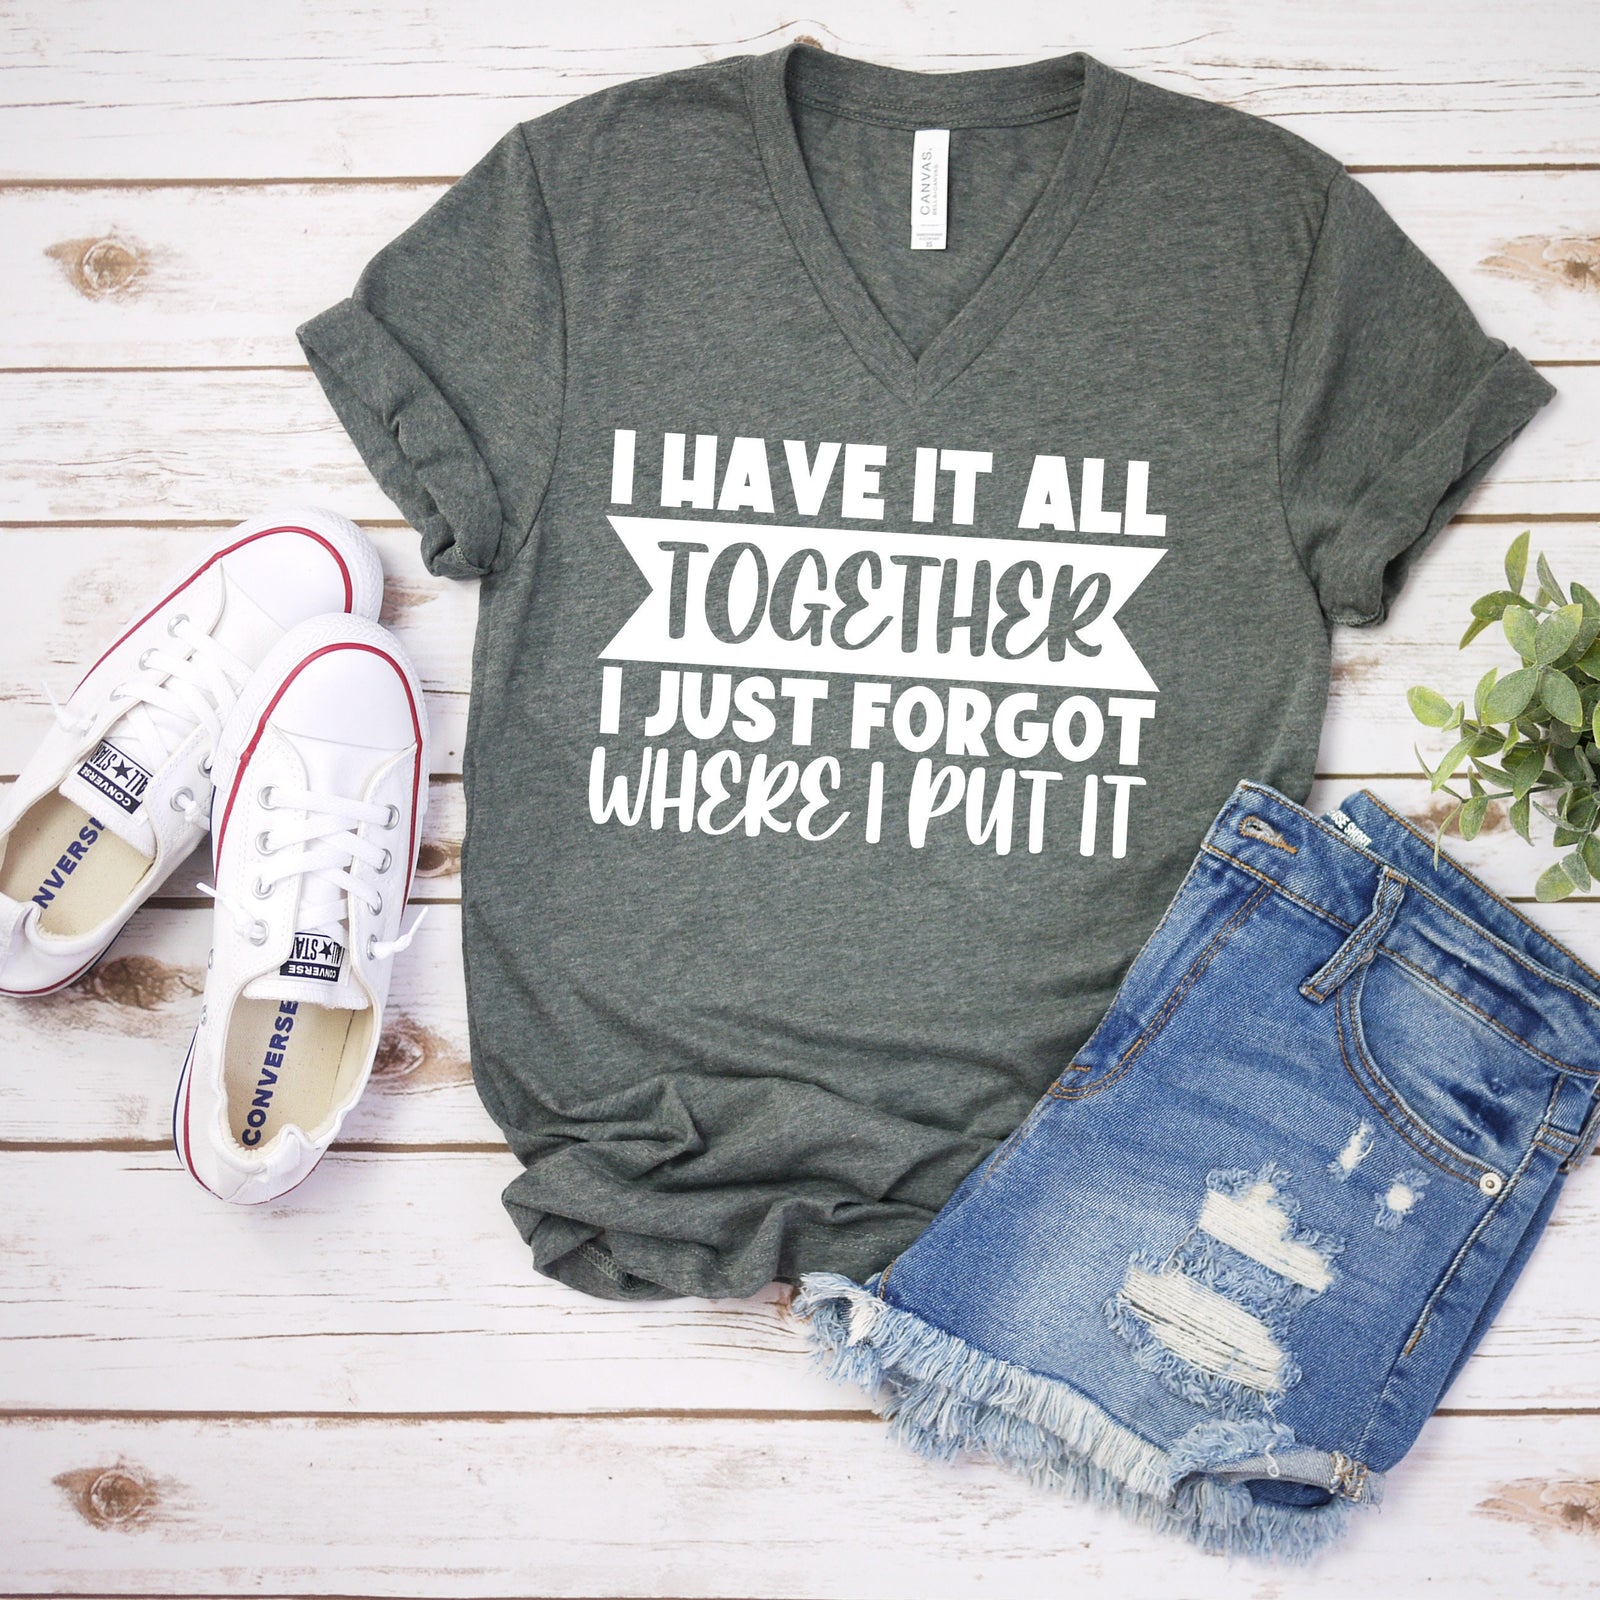 I Have it All Together I just Forgot Where I Put It T Shirt - Funny Sarcastic T Shirt - Humor Shirt